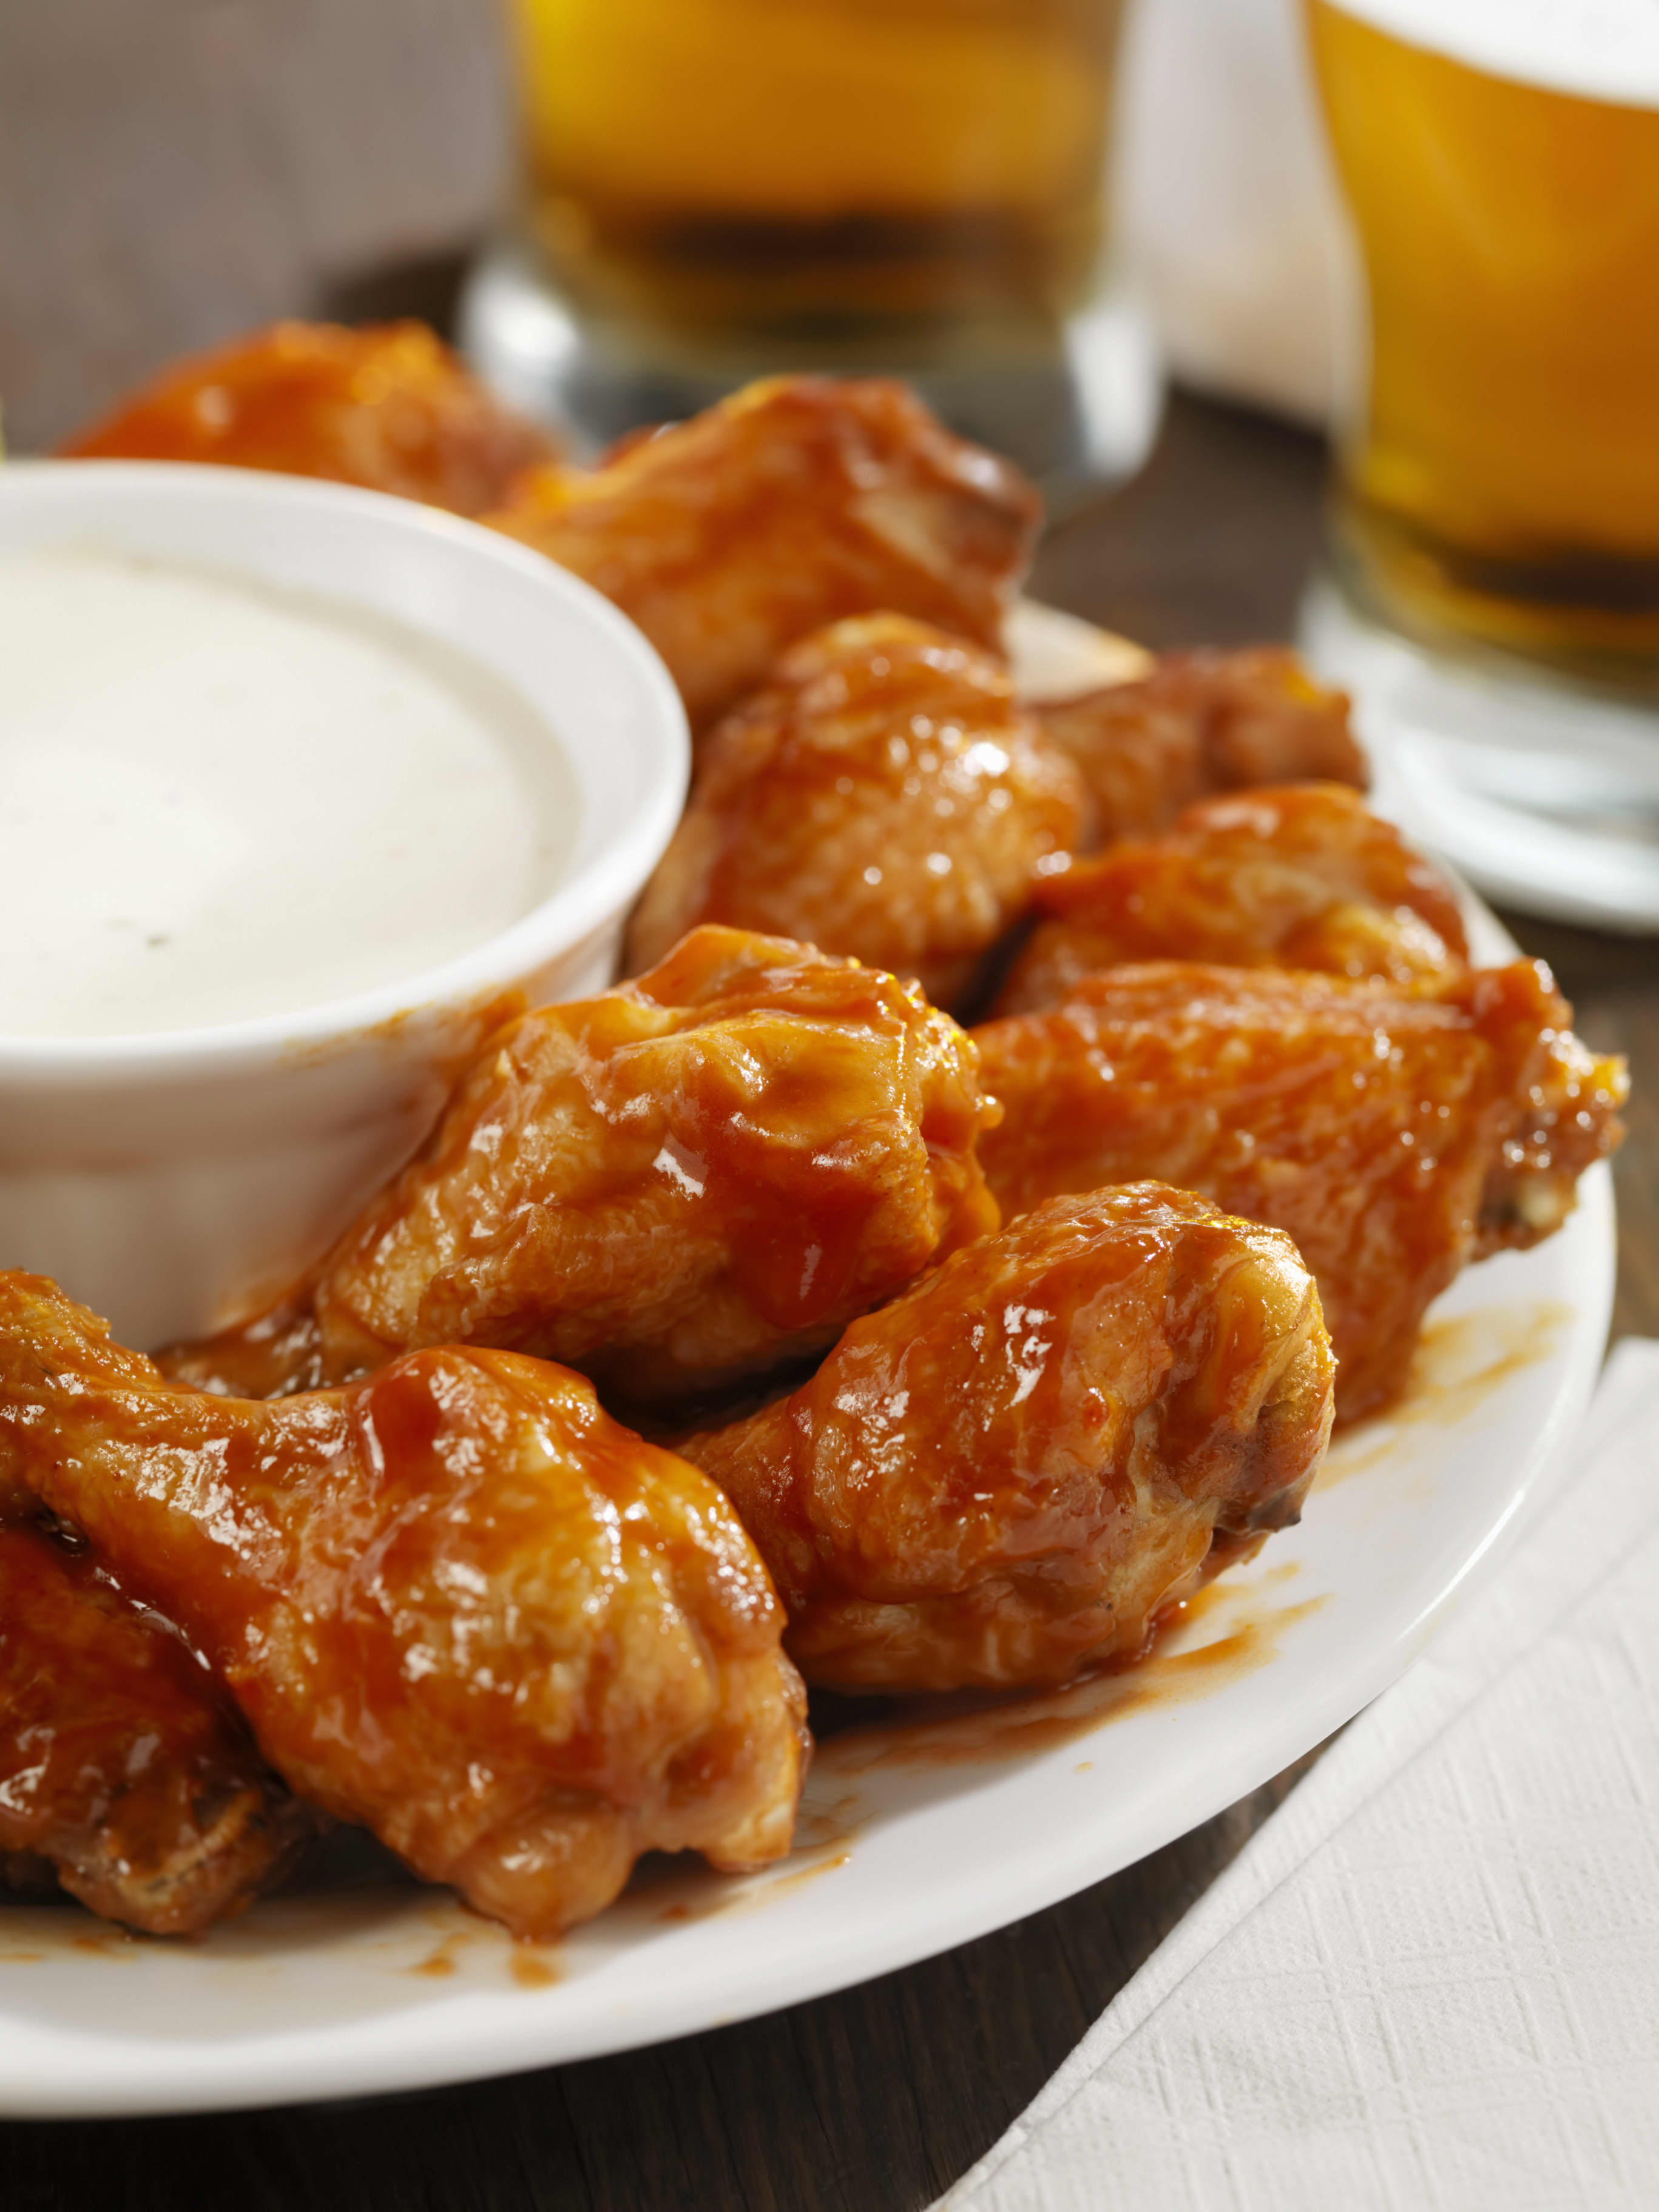 Downright Un-American! Chicken Wings Prices Up Ahead of Super Bowl